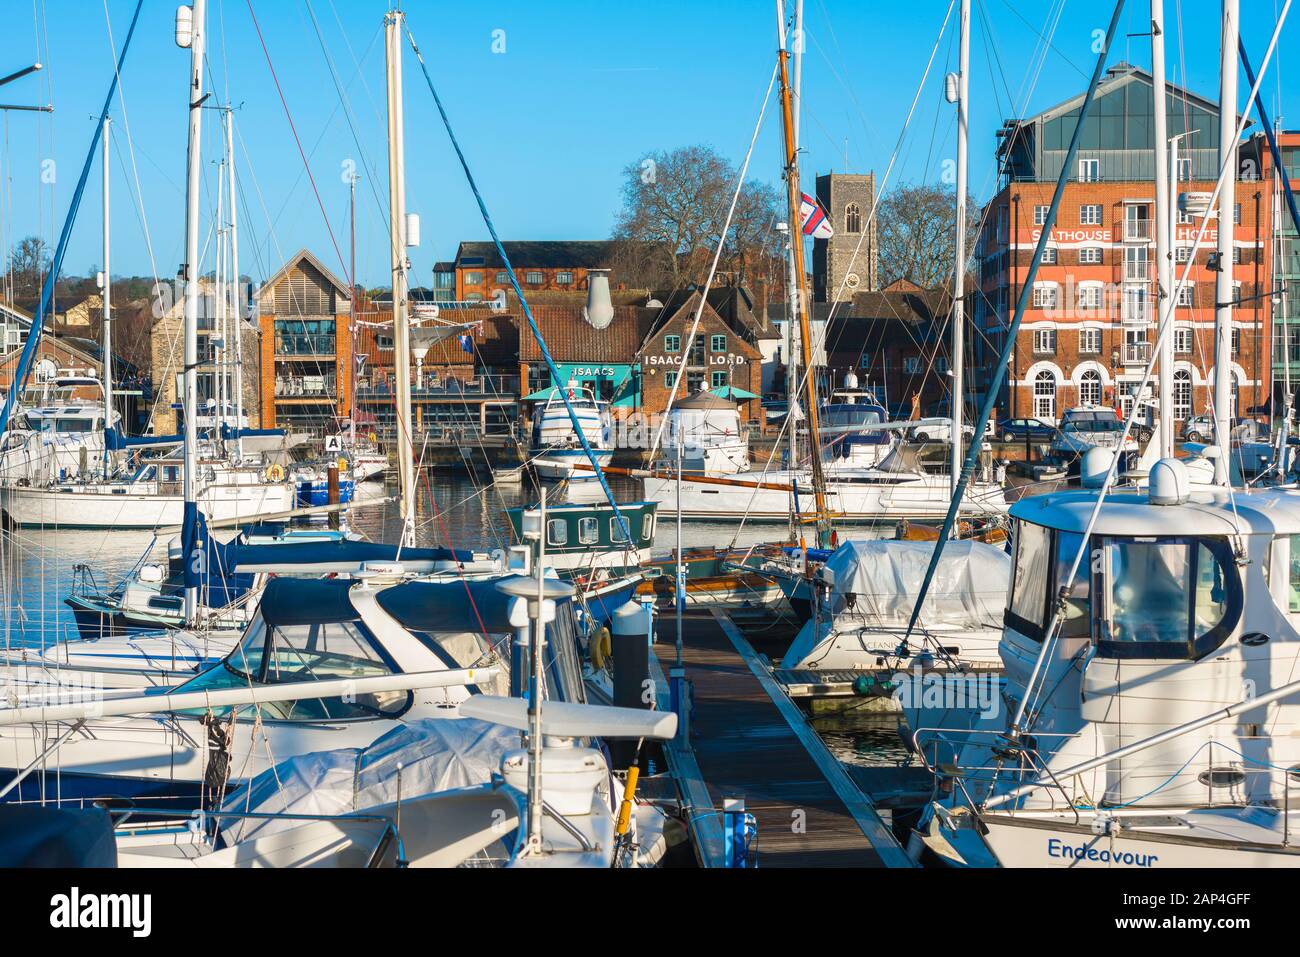 Ipswich waterfront, view across the marina towards bars and residential property along Wherry Quay in the Ipswich waterfront area, Suffolk, UK. Stock Photo